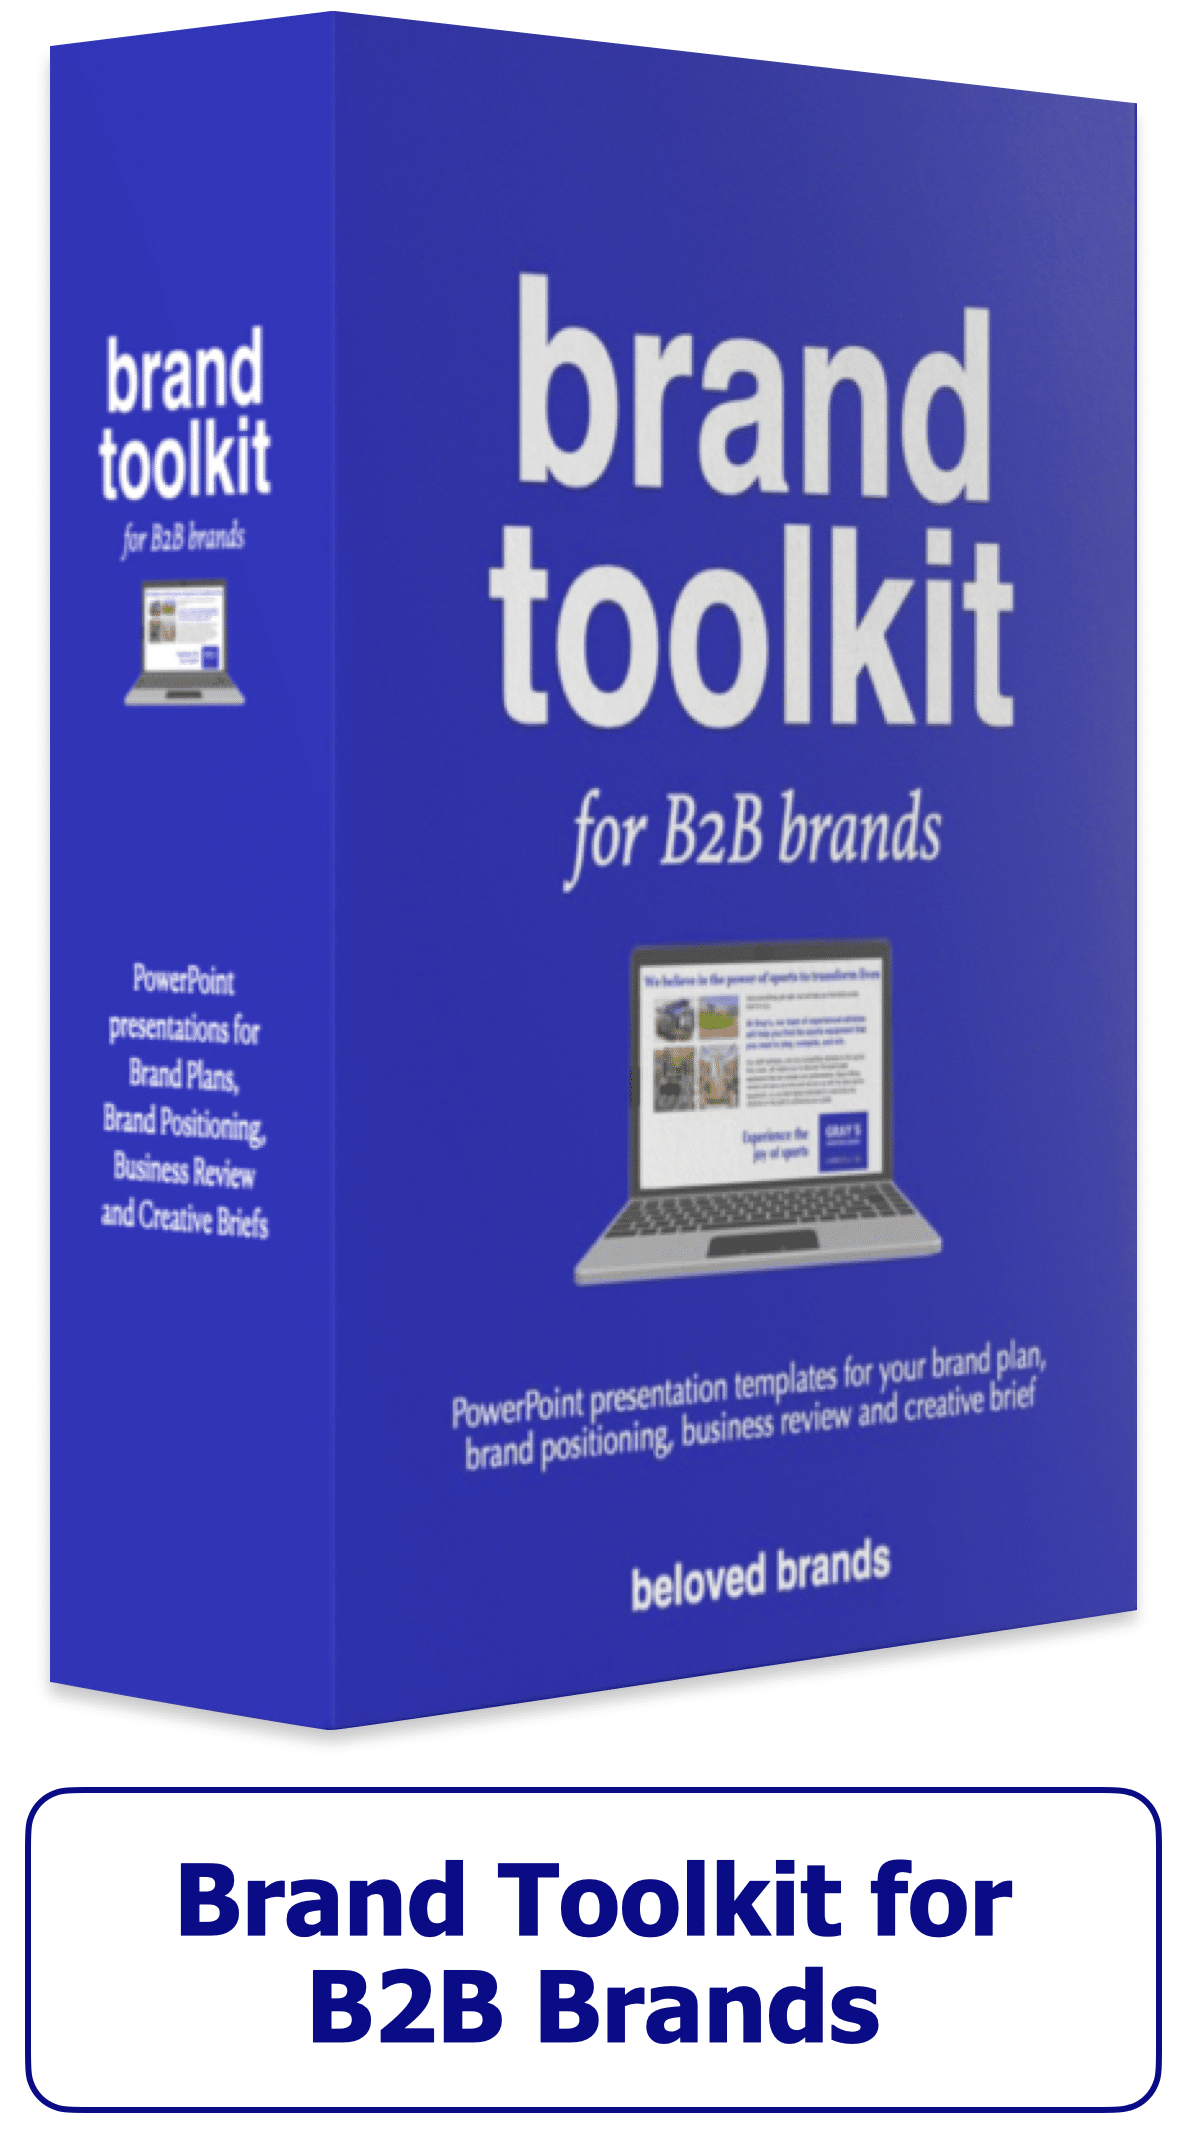 Brand Toolkit for B2B Brands